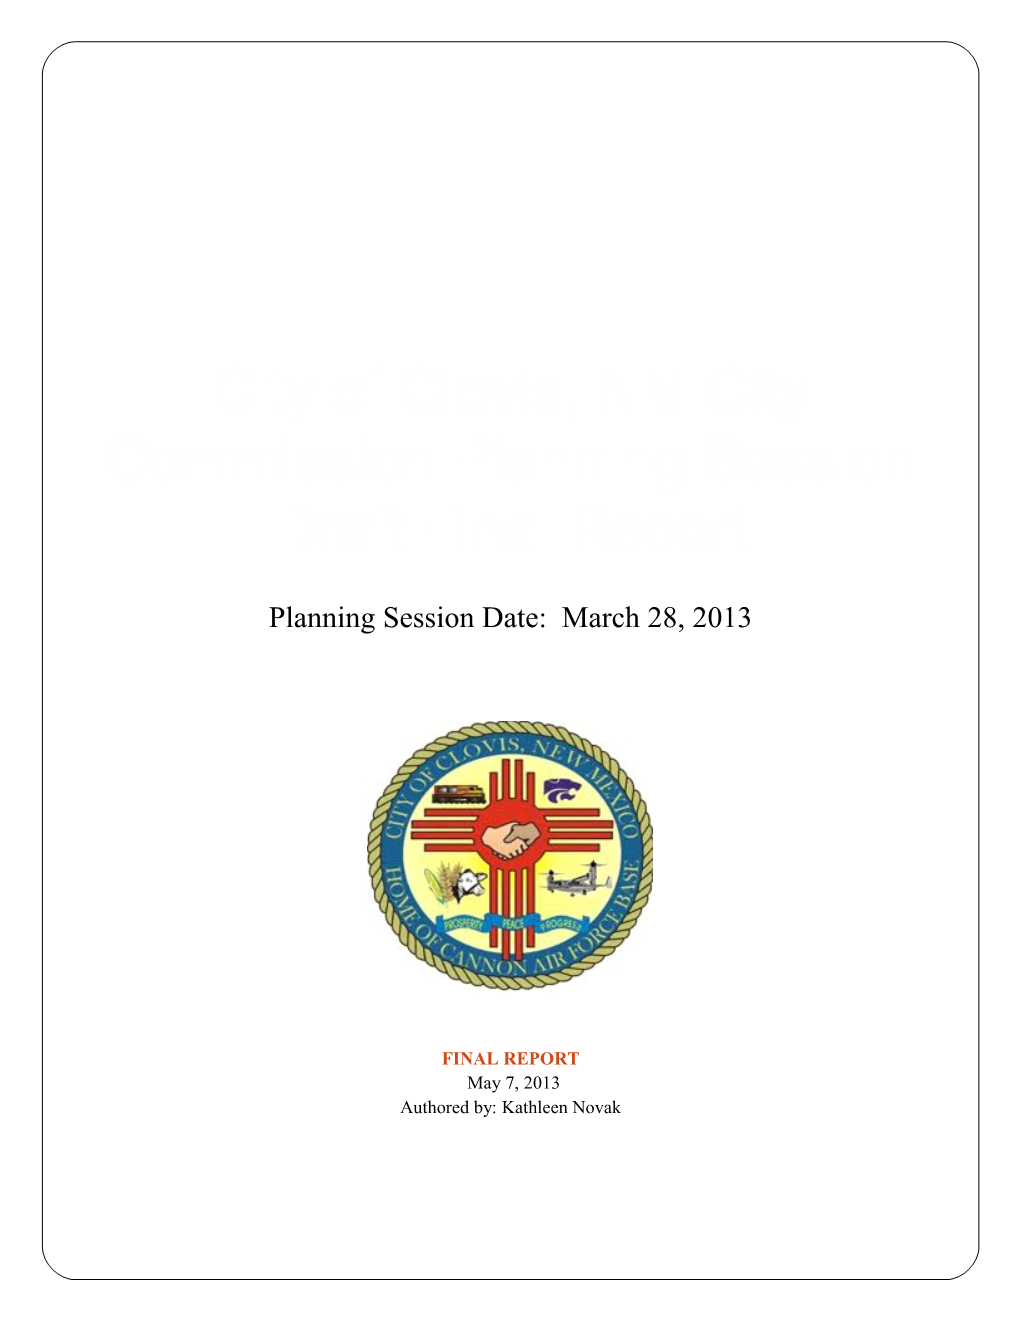 City of Clovis, NM City Commission Planning Session Draft Final Report